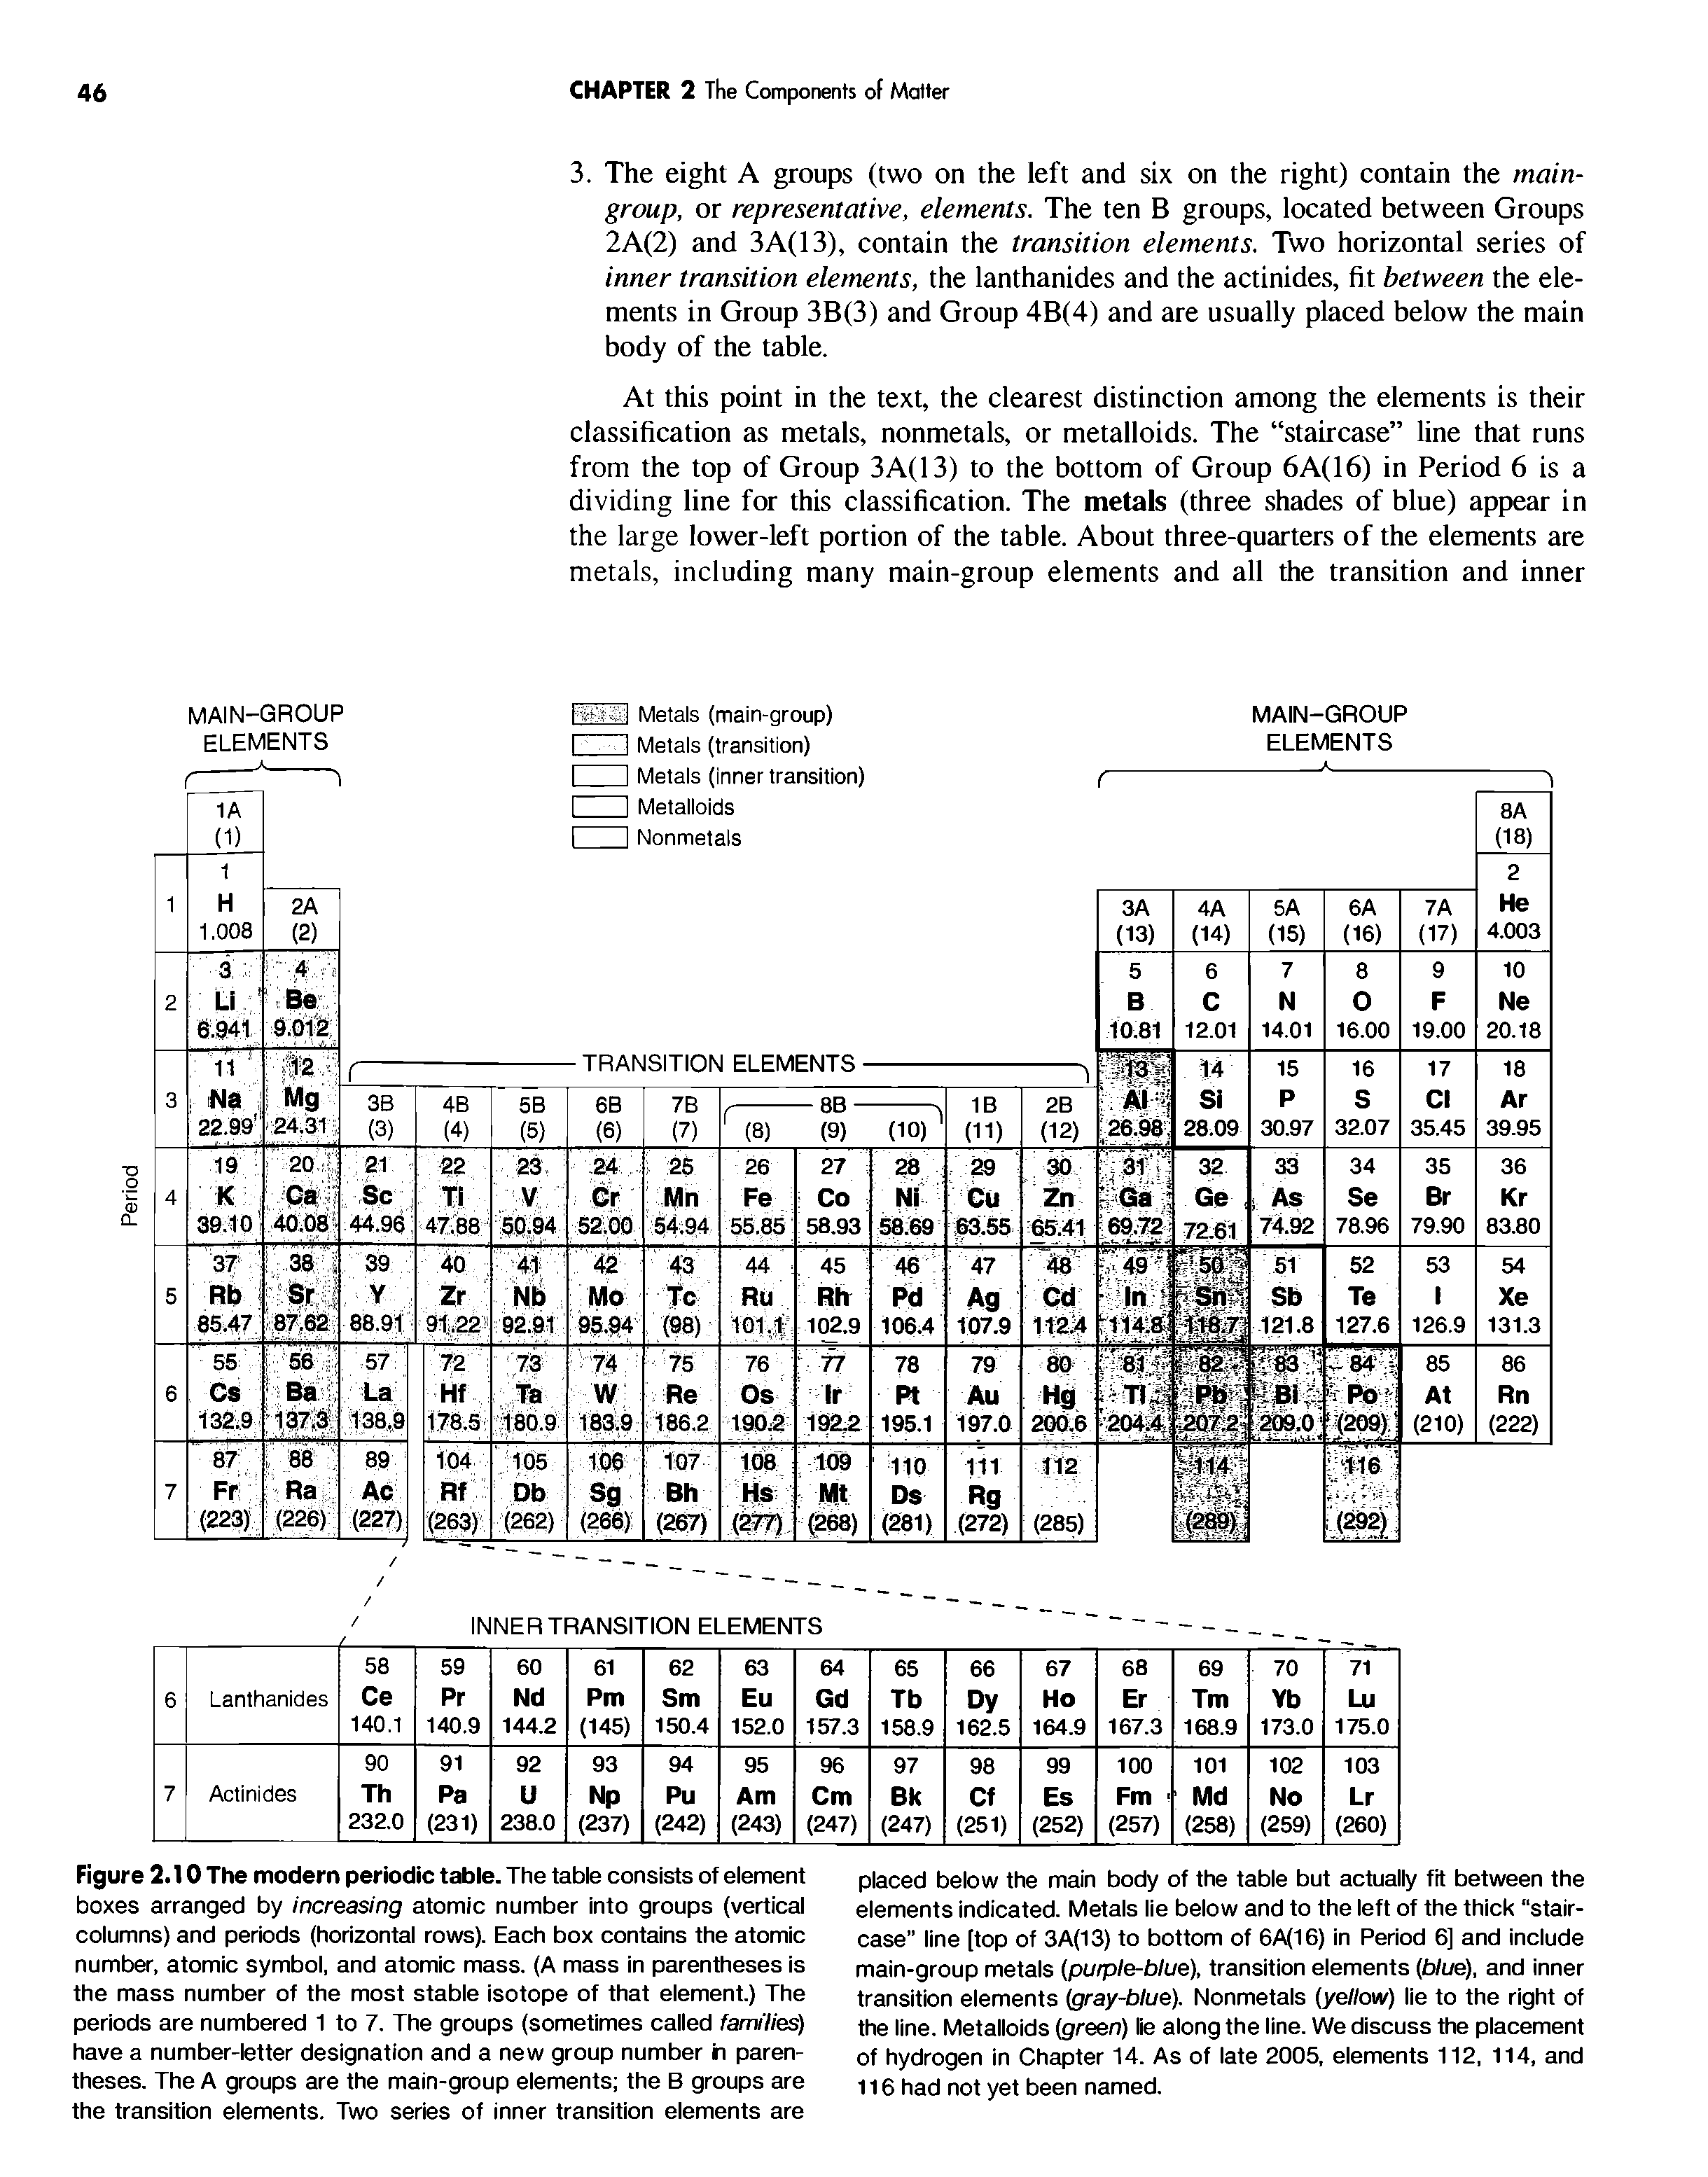 Figure 2.10 The modern periodic table. The table consists of element boxes arranged by increasing atomic number into groups (vertical columns) and periods (horizontal rows). Each box contains the atomic number, atomic symbol, and atomic mass. (A mass in parentheses is the mass number of the most stable isotope of that element.) The periods are numbered 1 to 7. The groups (sometimes called families have a number-letter designation and a new group number h parentheses. The A groups are the main-group elements the B groups are the transition elements. Two series of inner transition elements are...